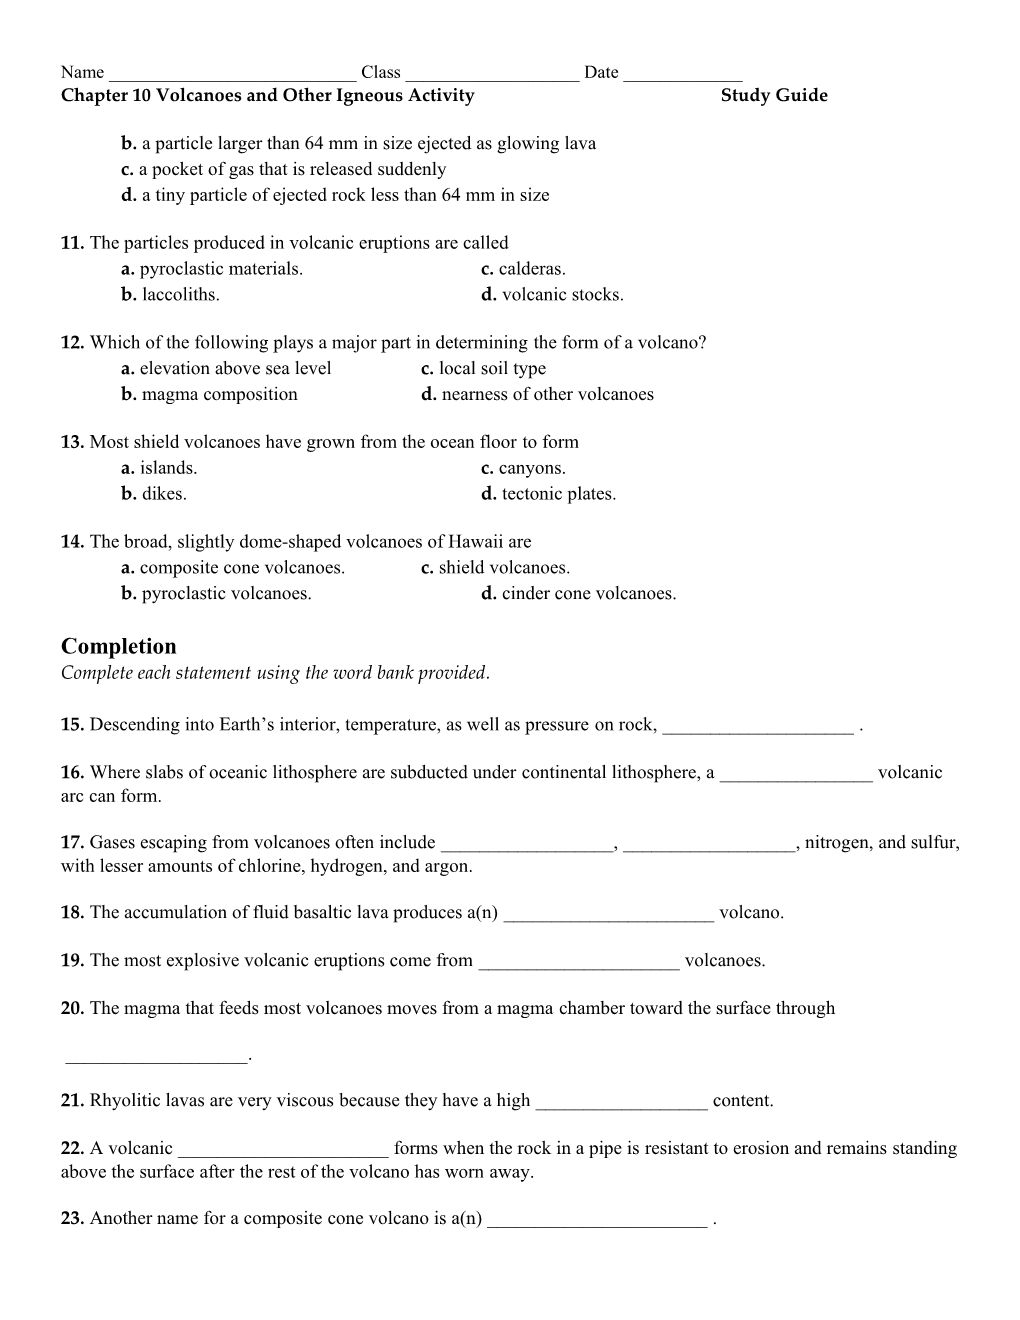 Chapter 10 Volcanoes and Other Igneous Activity Study Guide